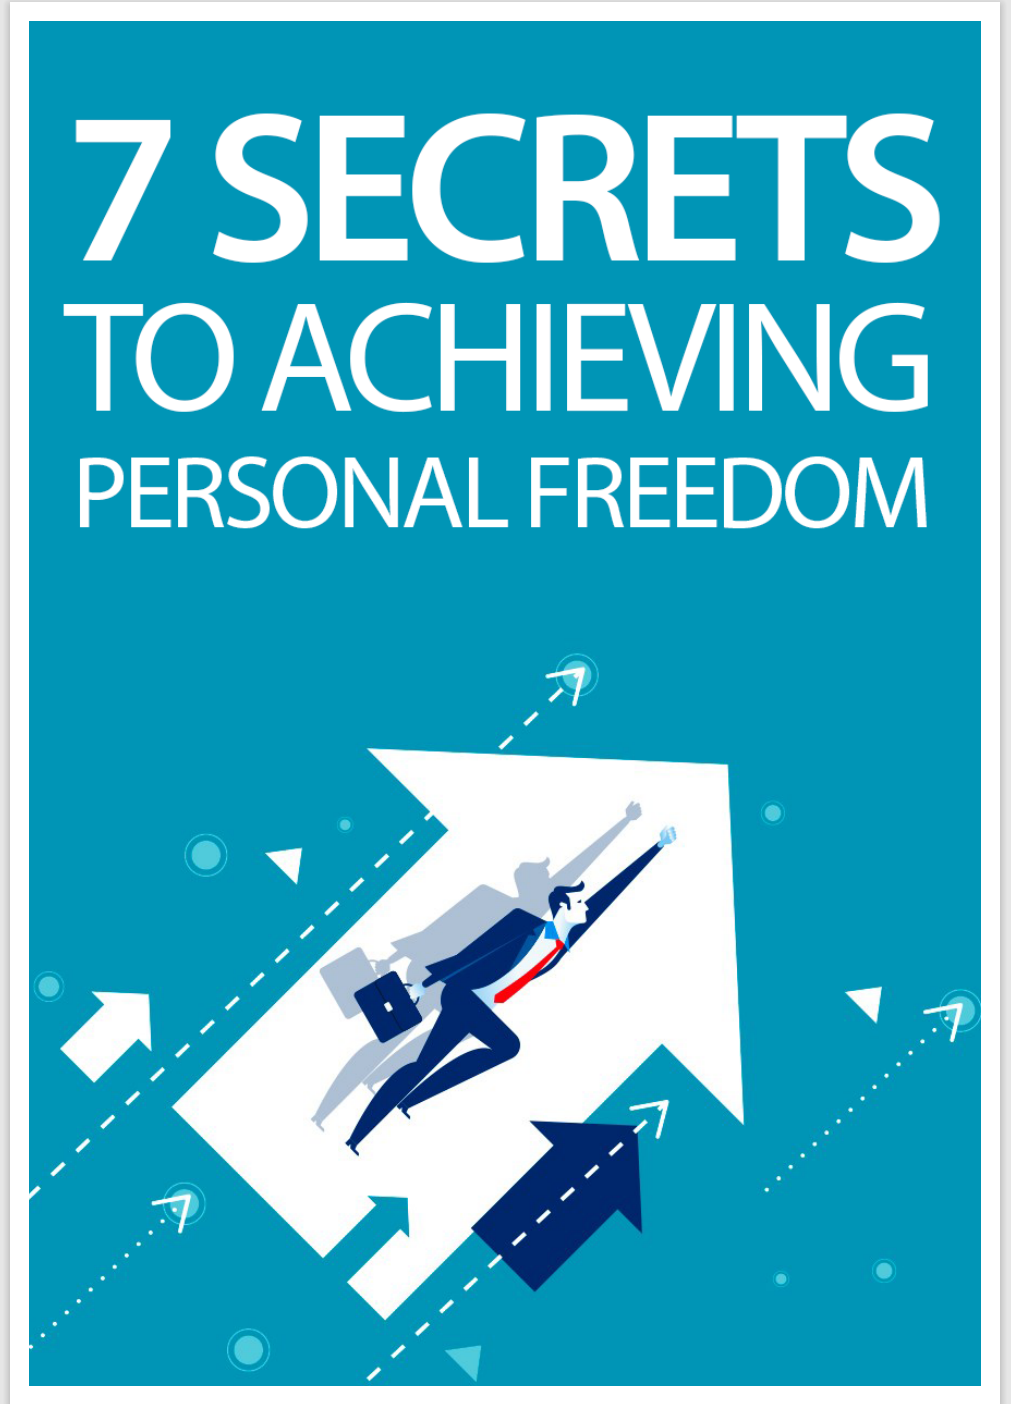 7 Secrets to Achieving Personal Freedom